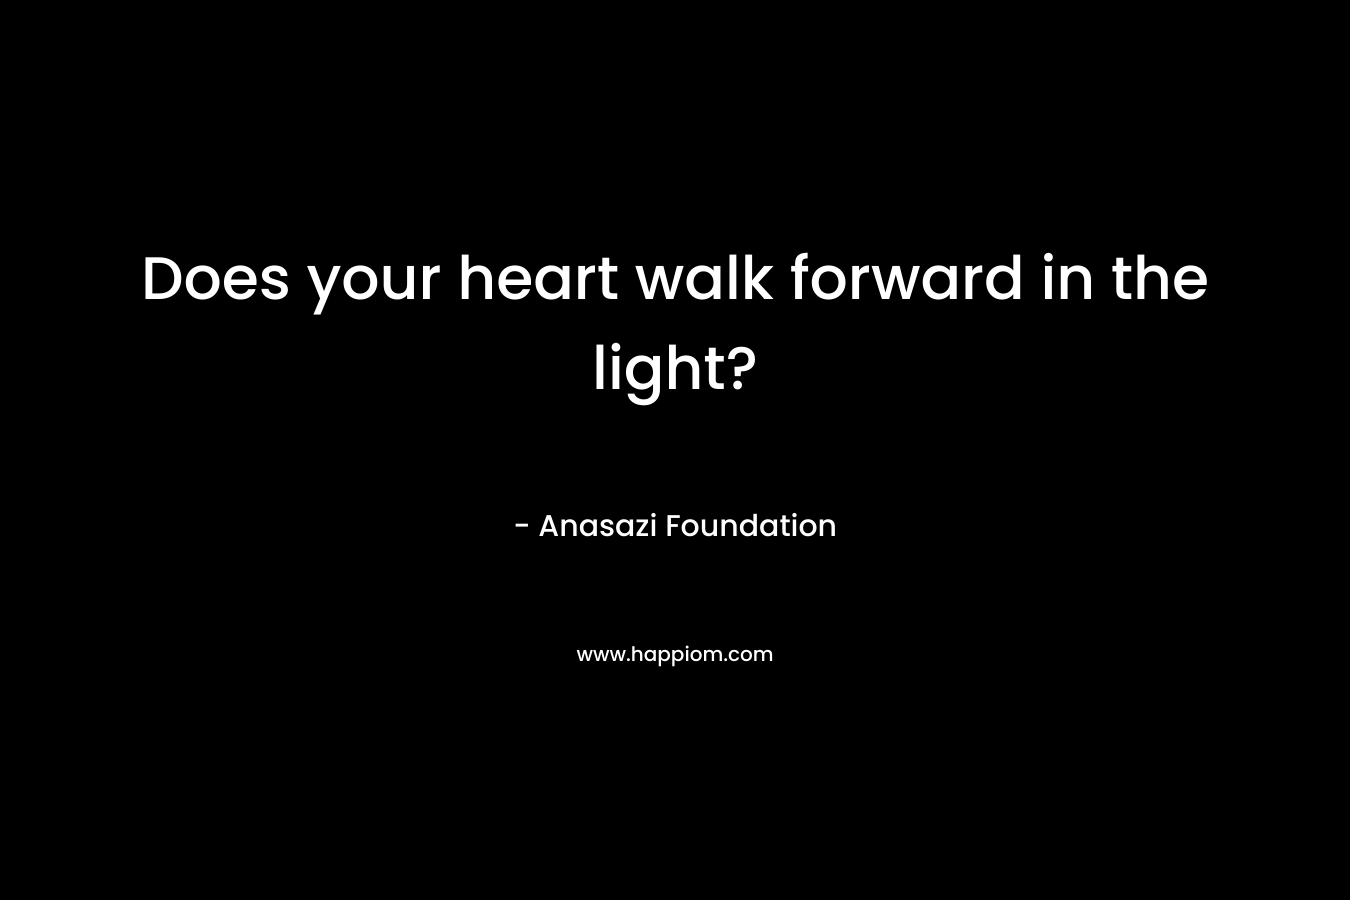 Does your heart walk forward in the light? – Anasazi Foundation